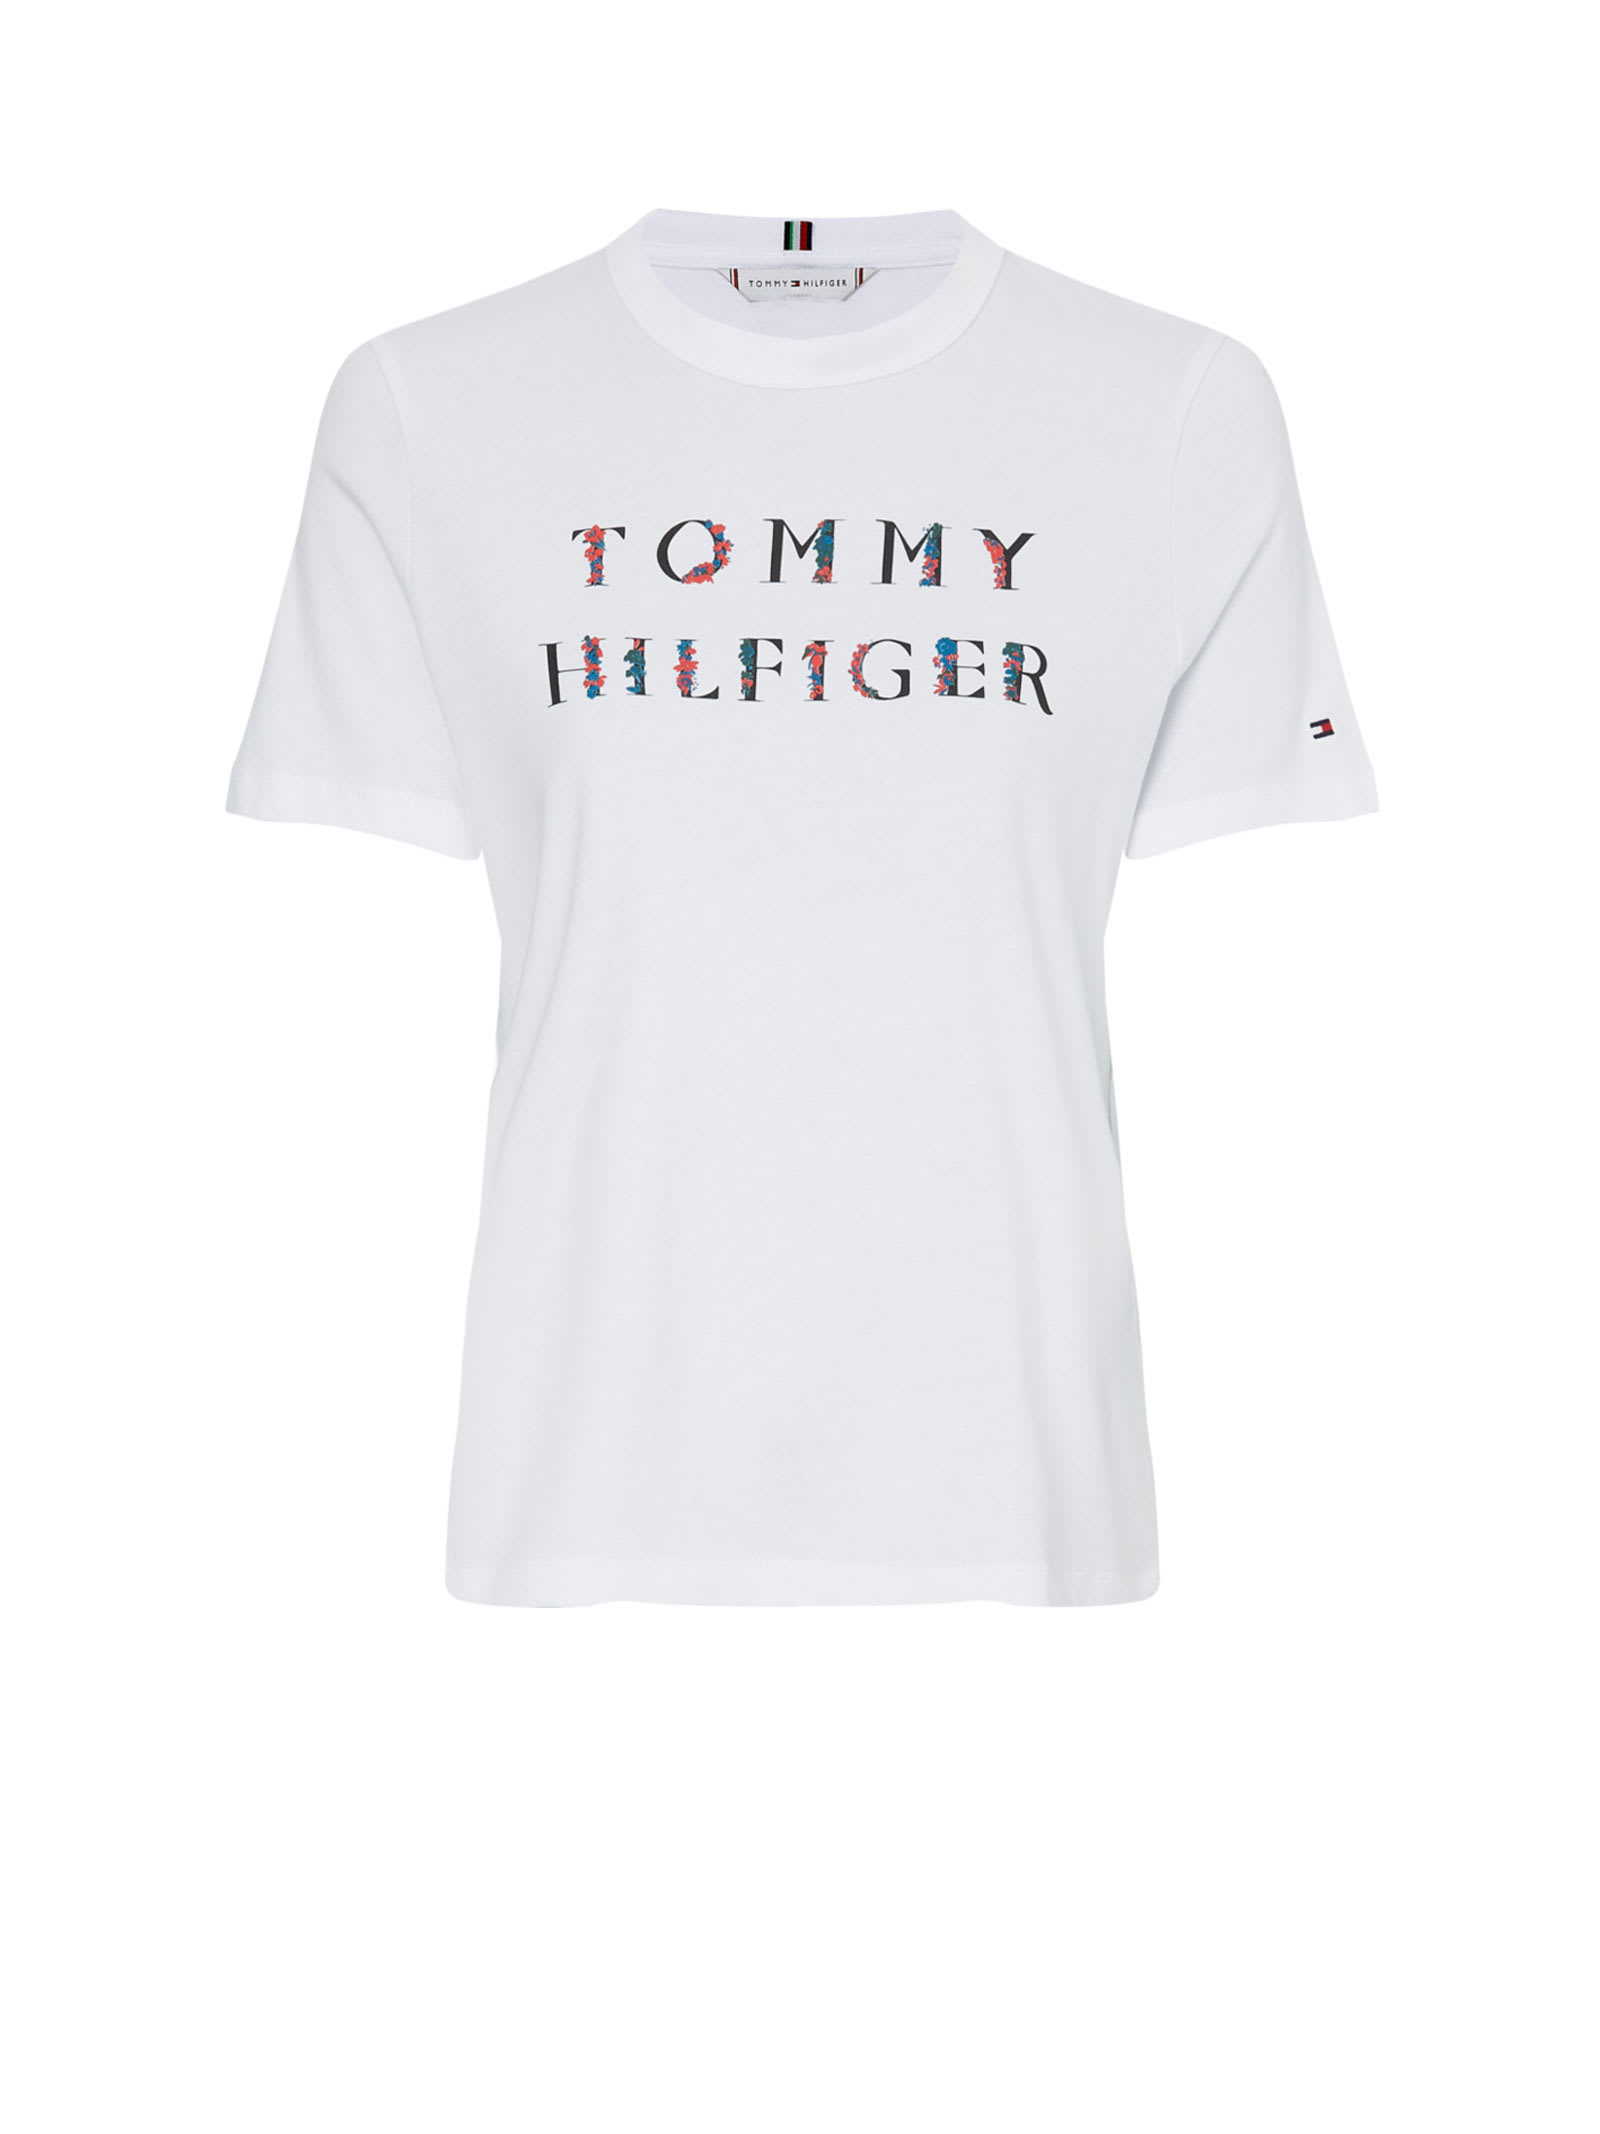 Tommy Hilfiger White Cotton T-shirt With Logo